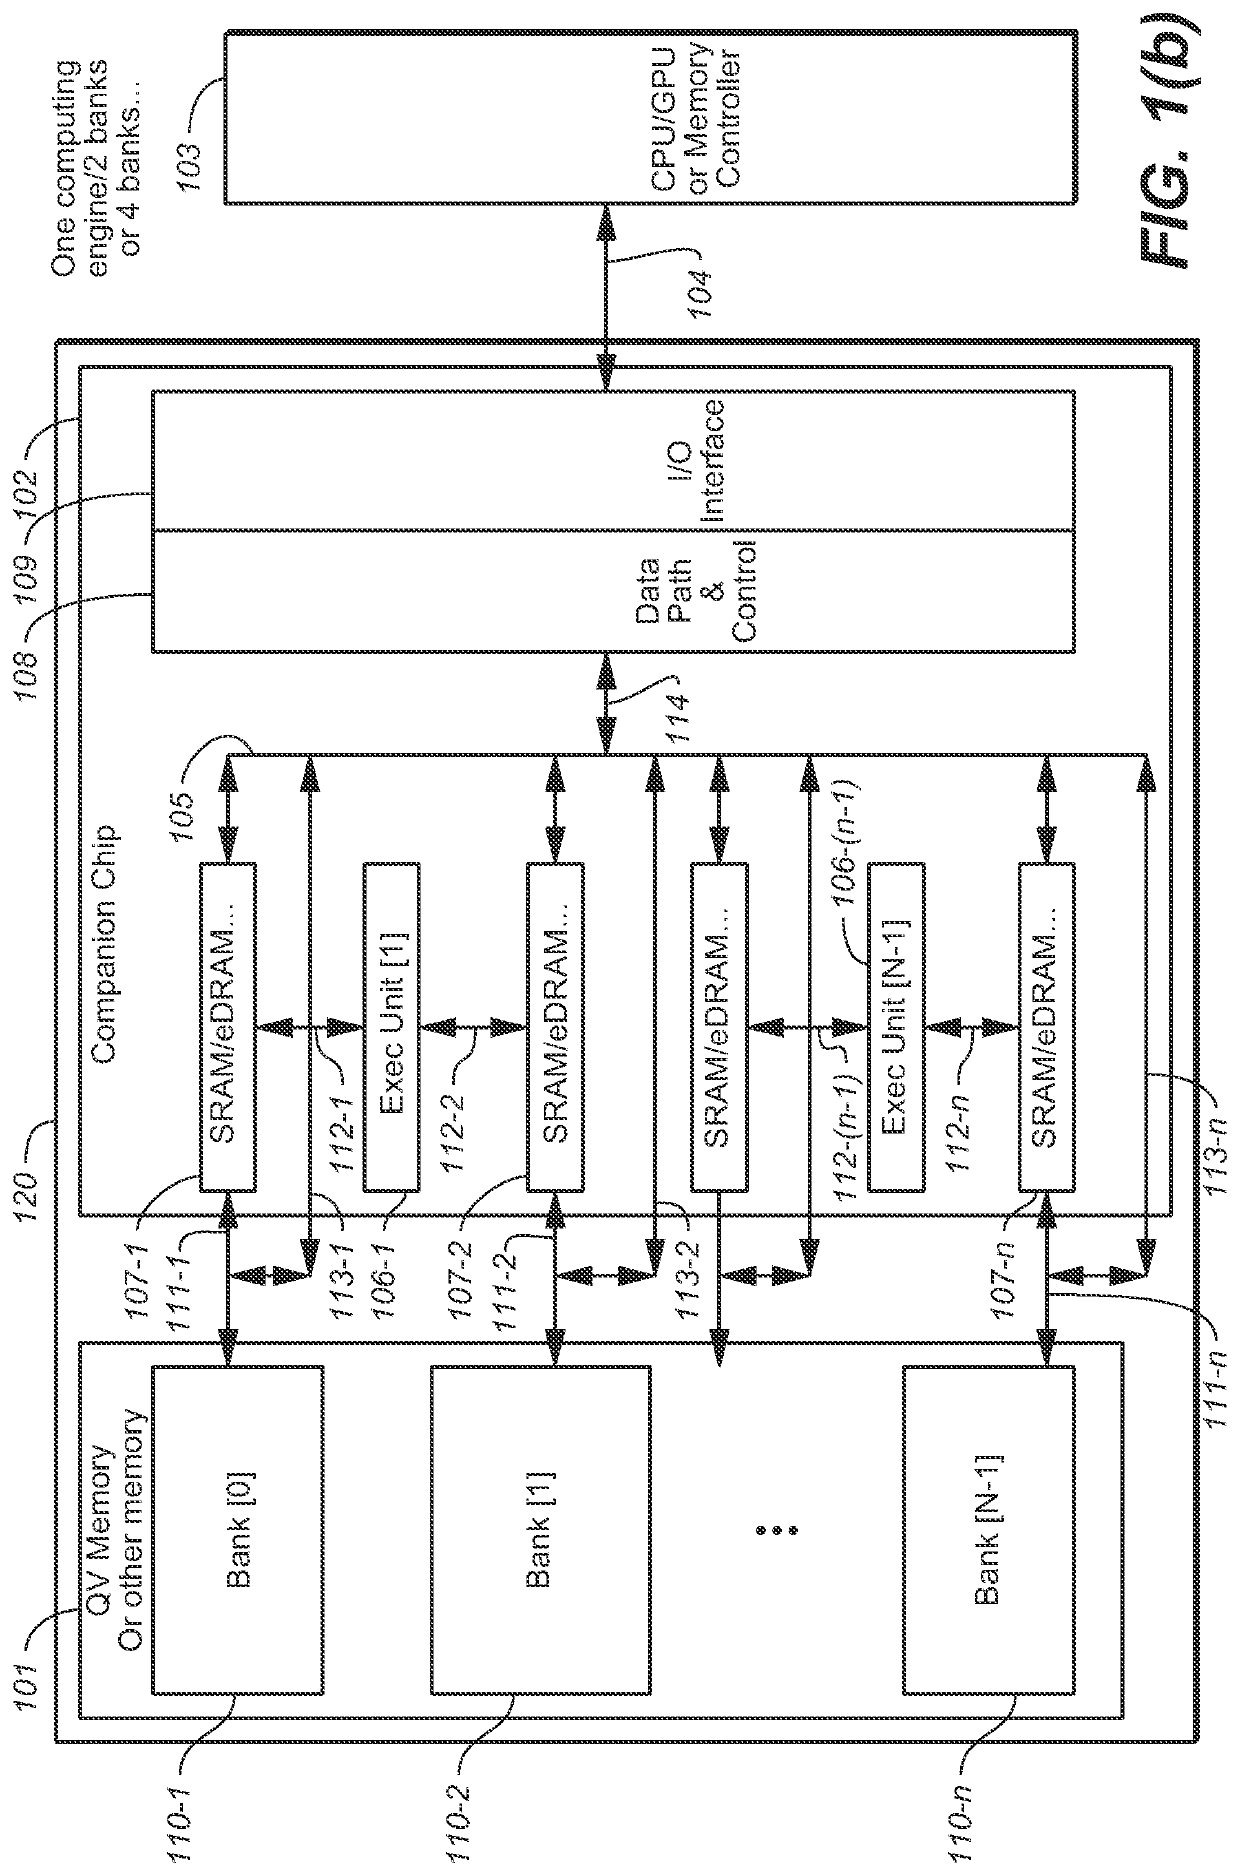 High capacity memory circuit with low effective latency